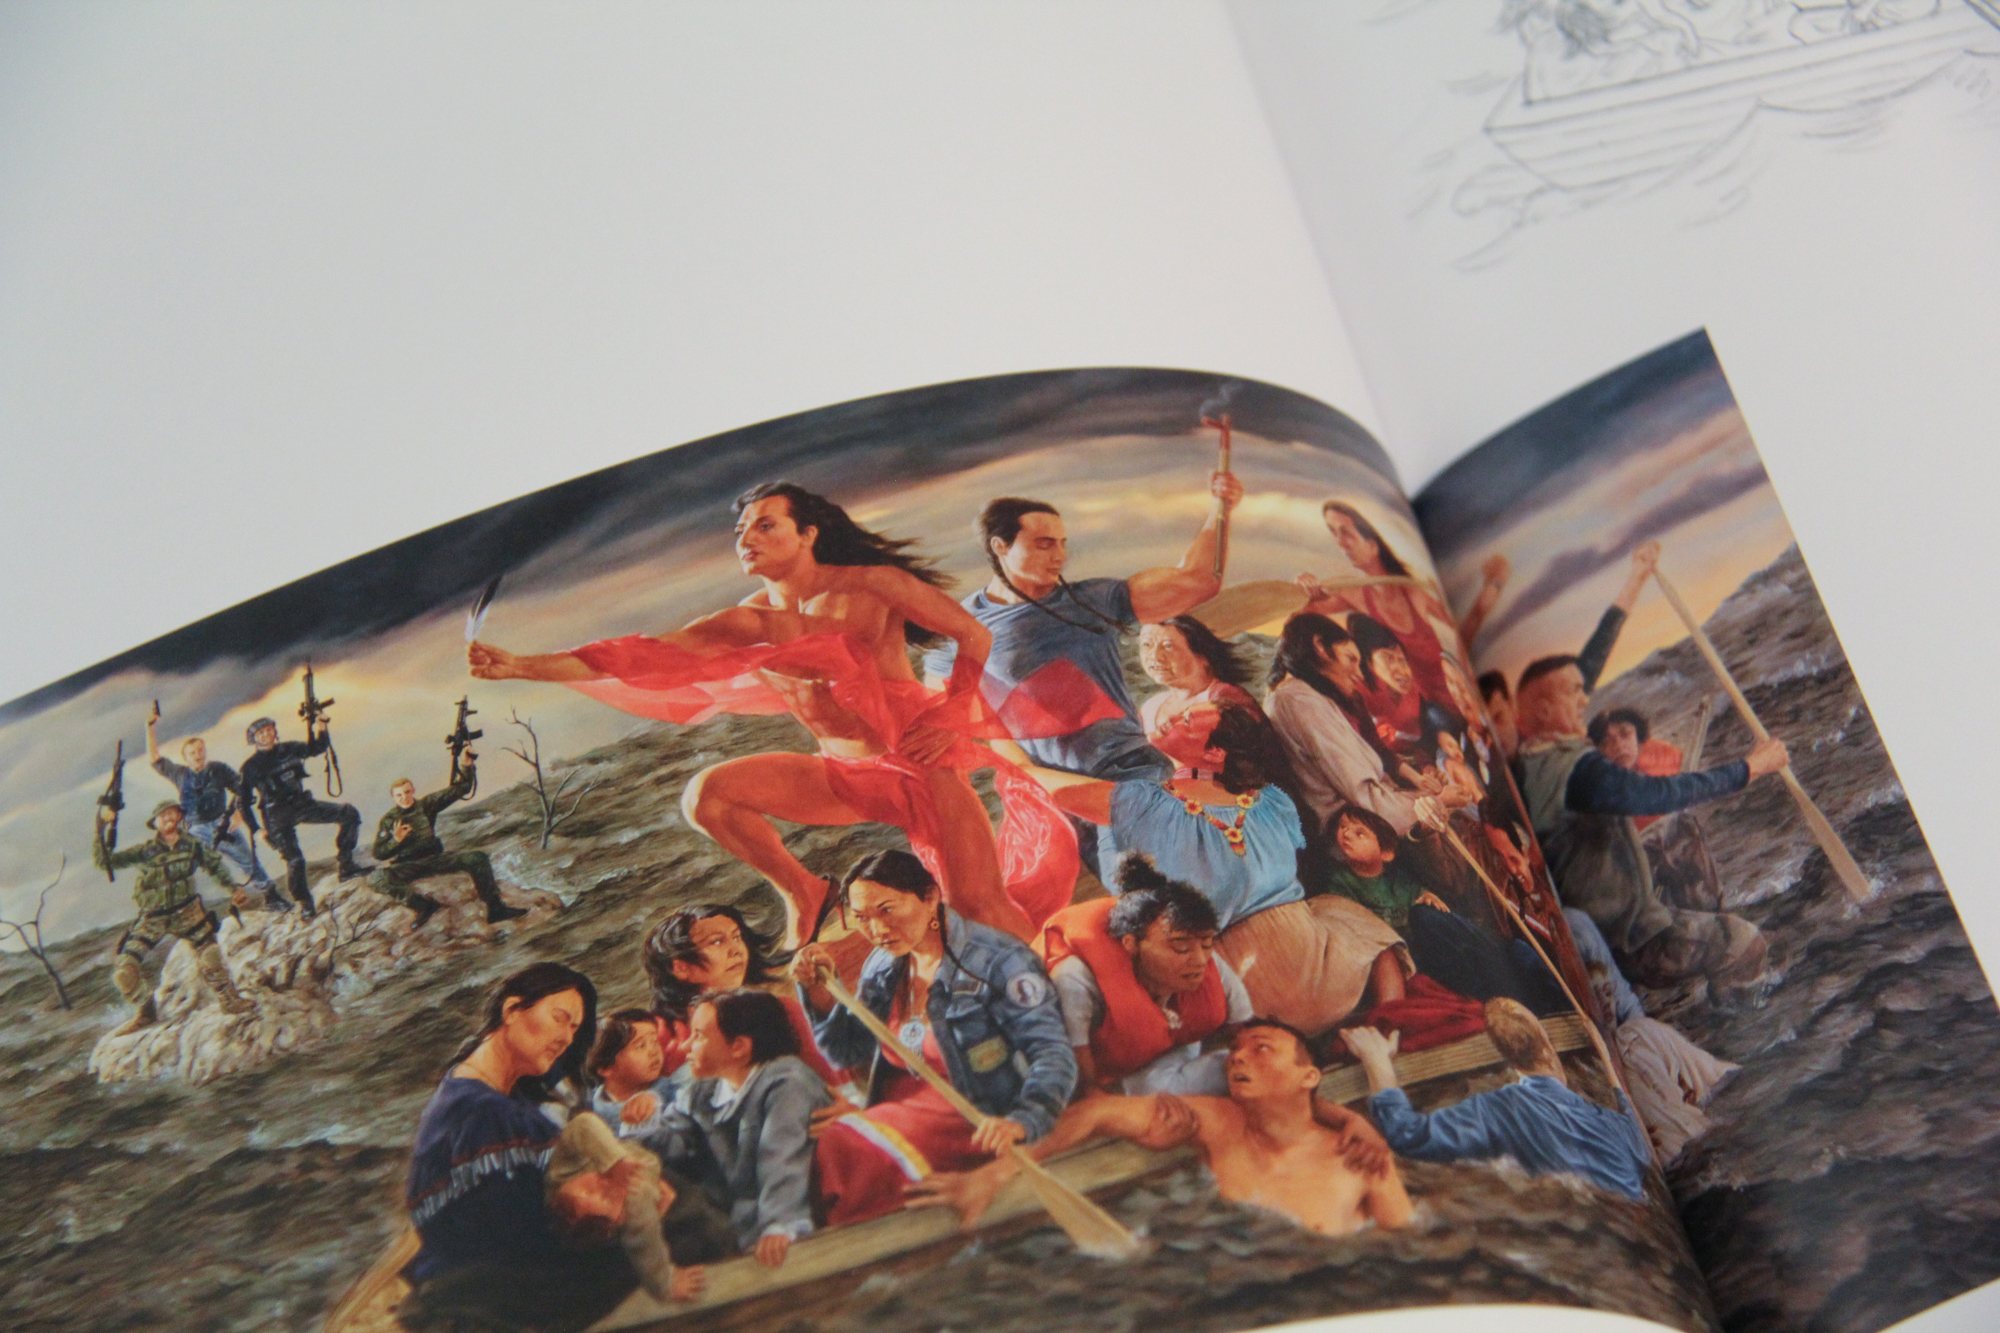 Kent Monkman: Revision and Resistance Product Image 5 of 7